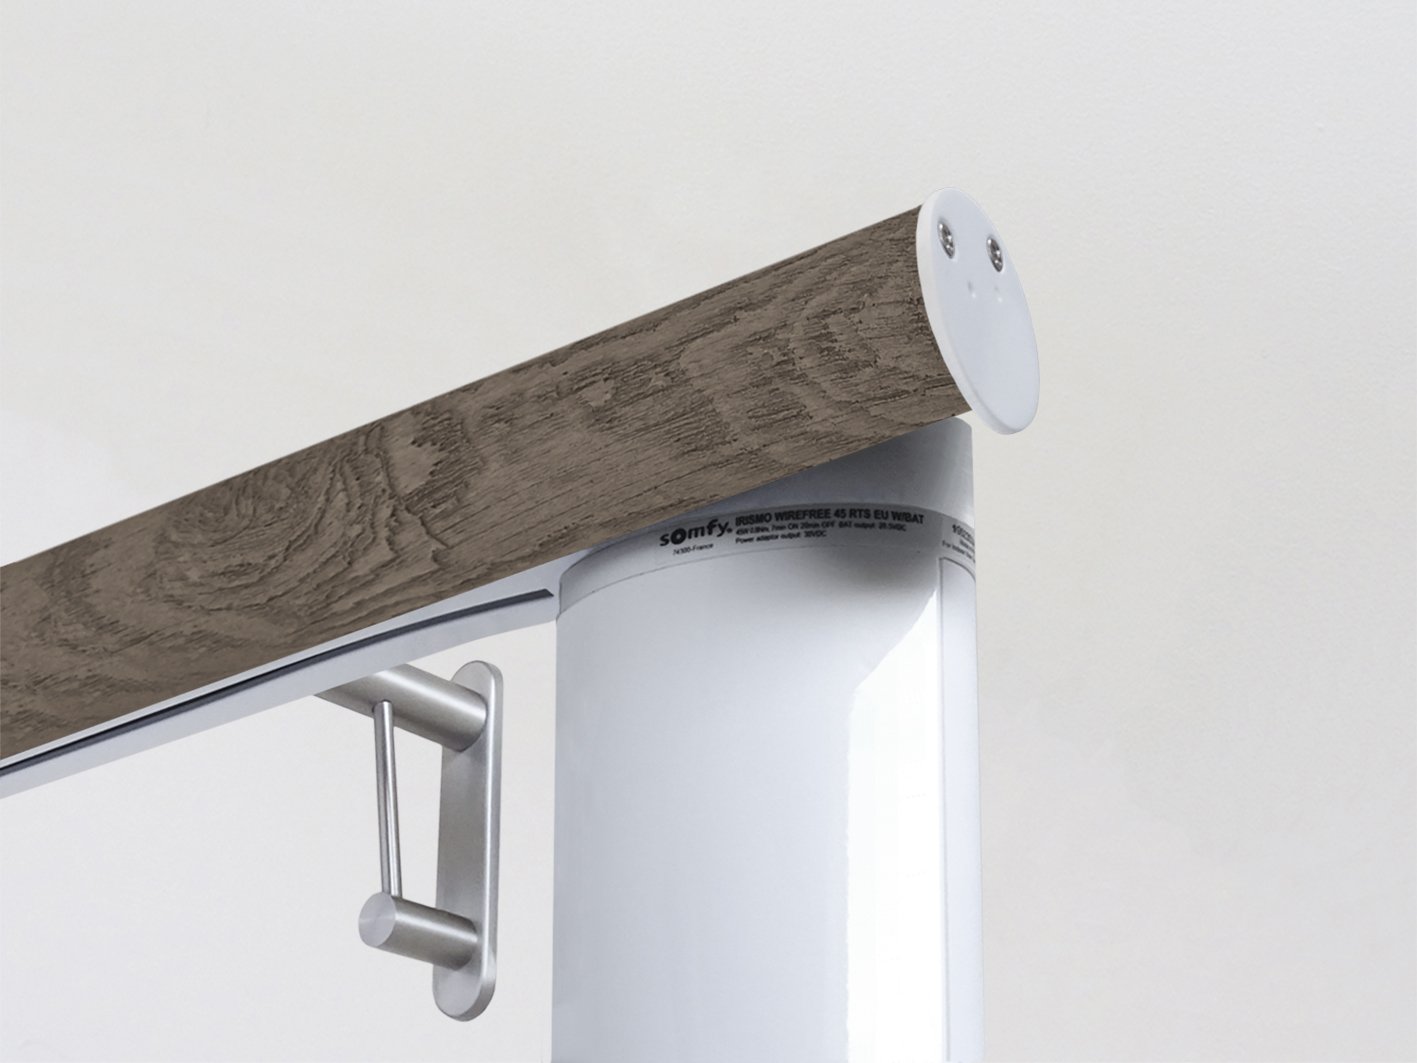 Motorised electric curtain pole in brazil nut brown driftwood, wireless & battery powered using the Somfy Glydea track | Walcot House UK curtain pole specialists